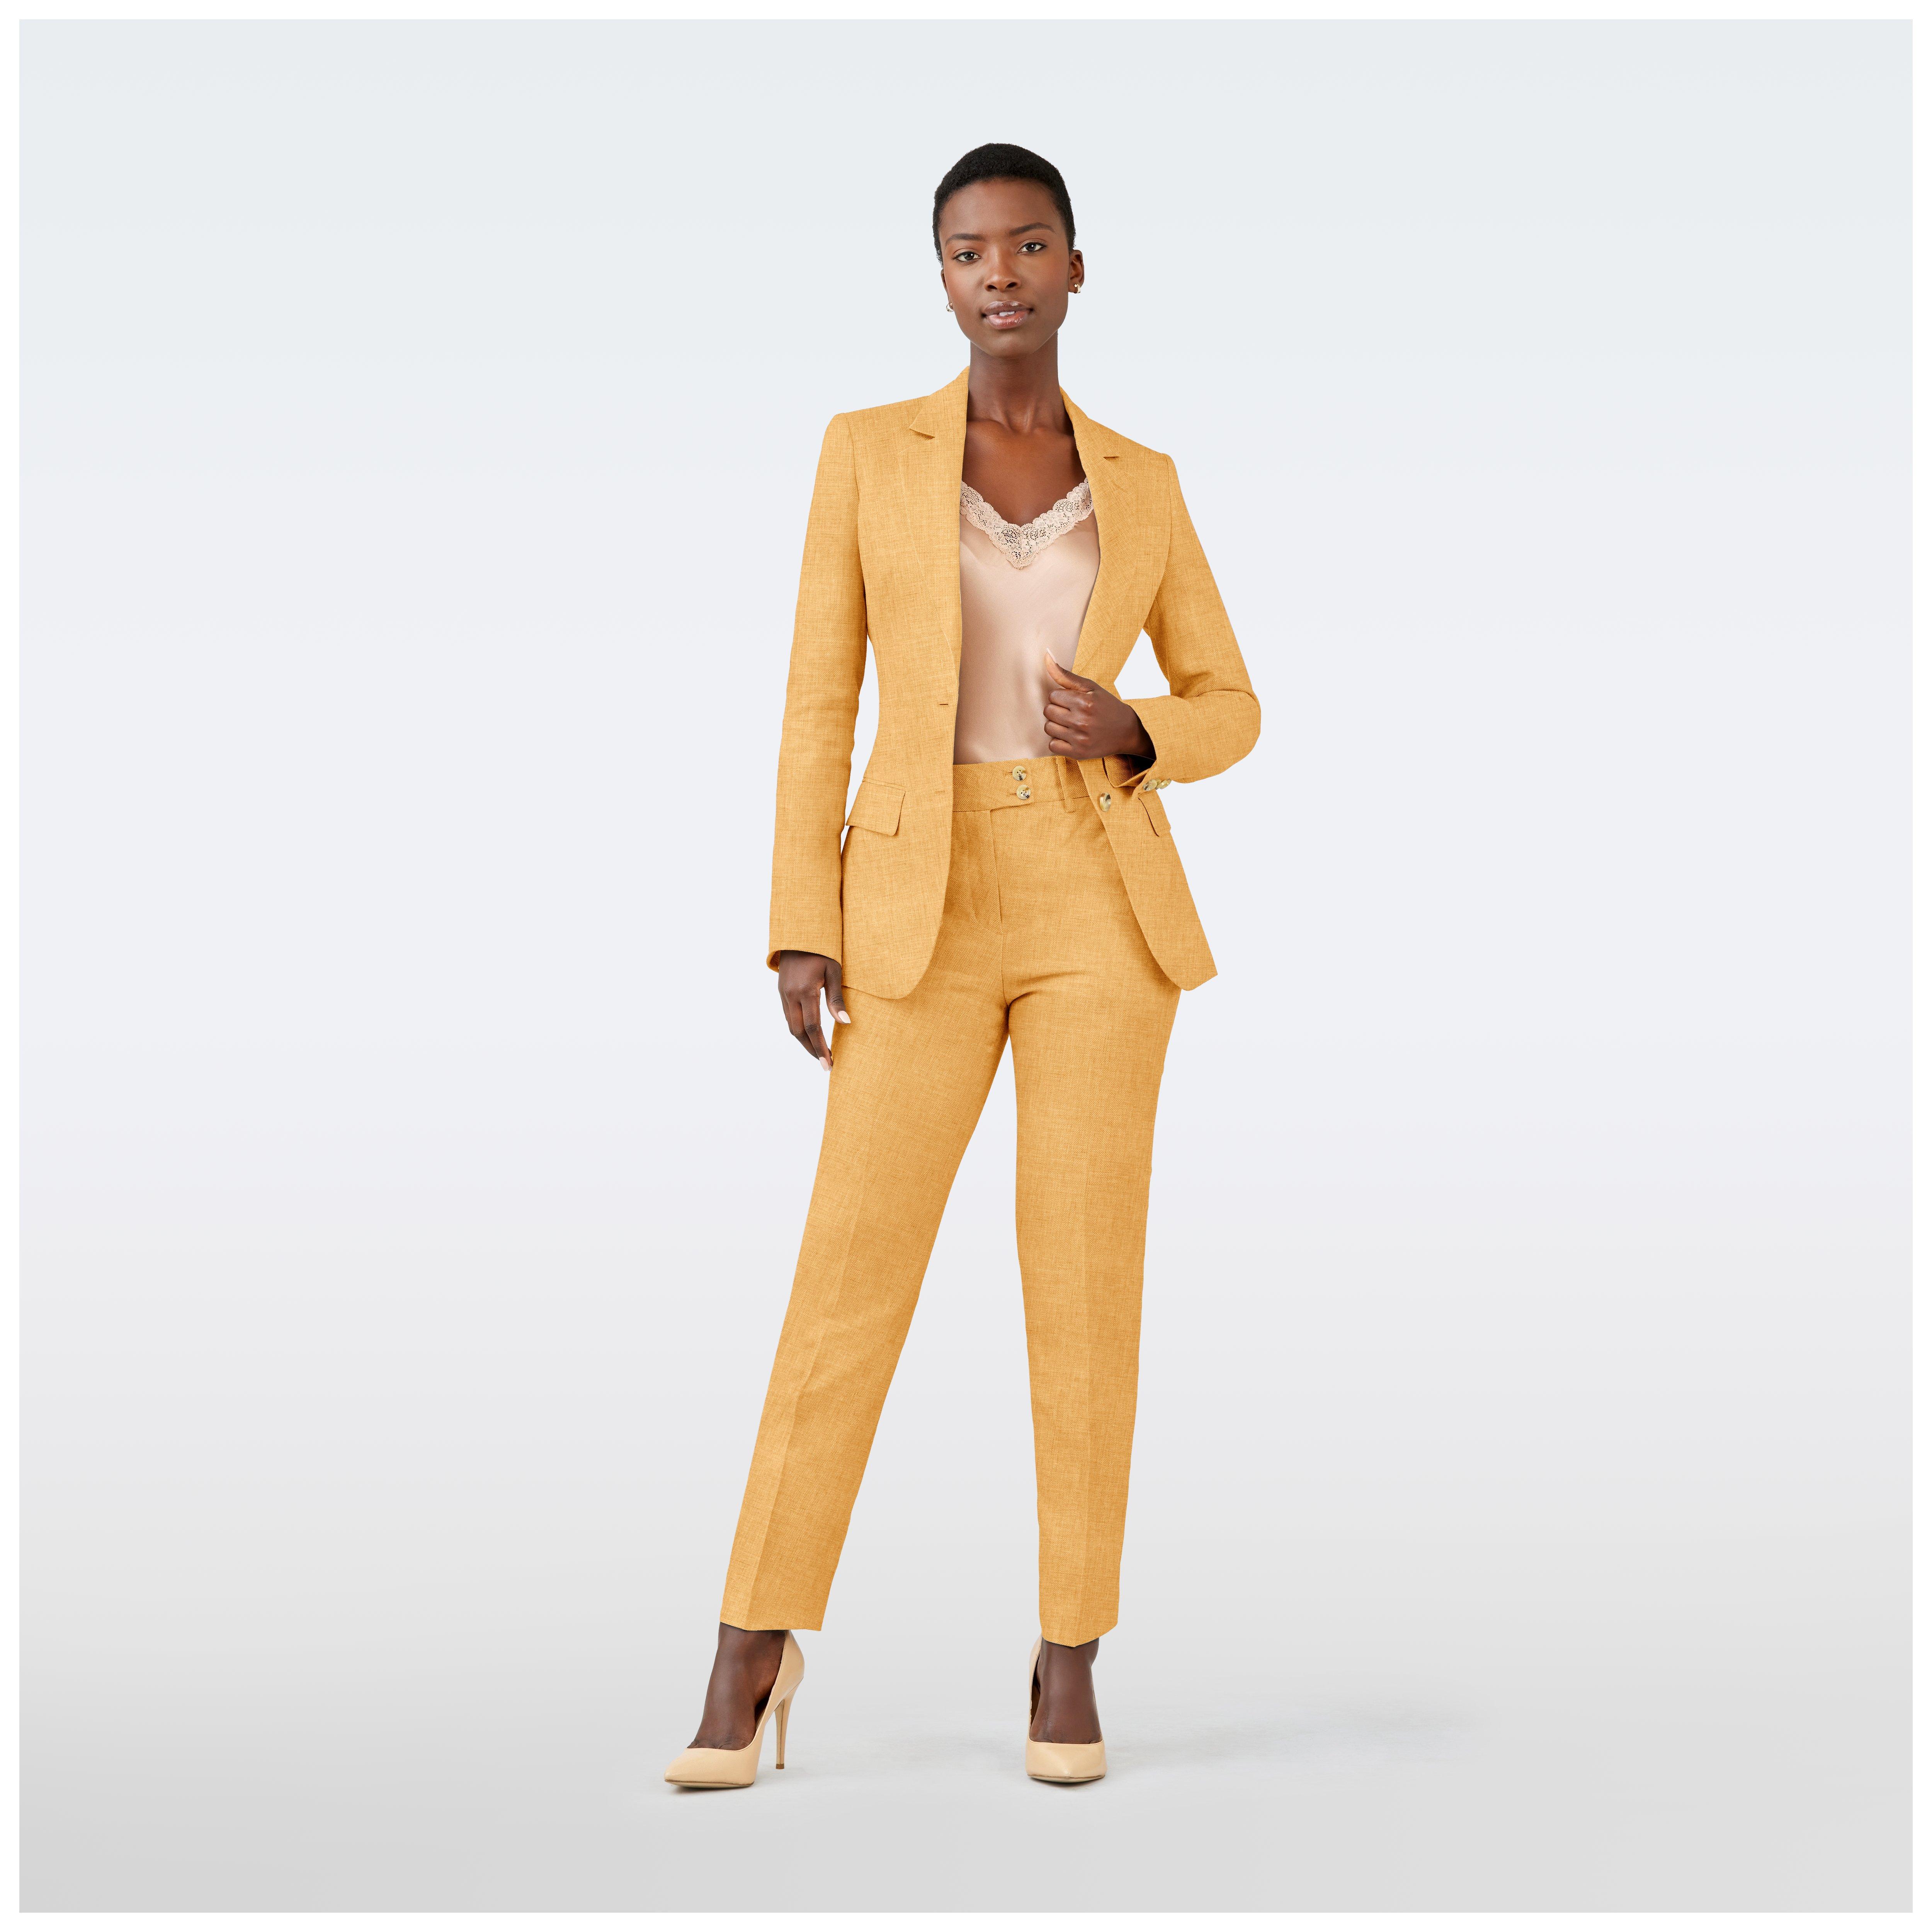 TeresaCollections - Yellow Open Stitch With Belt Irregular Jacket +  Straight Pants Suit Set